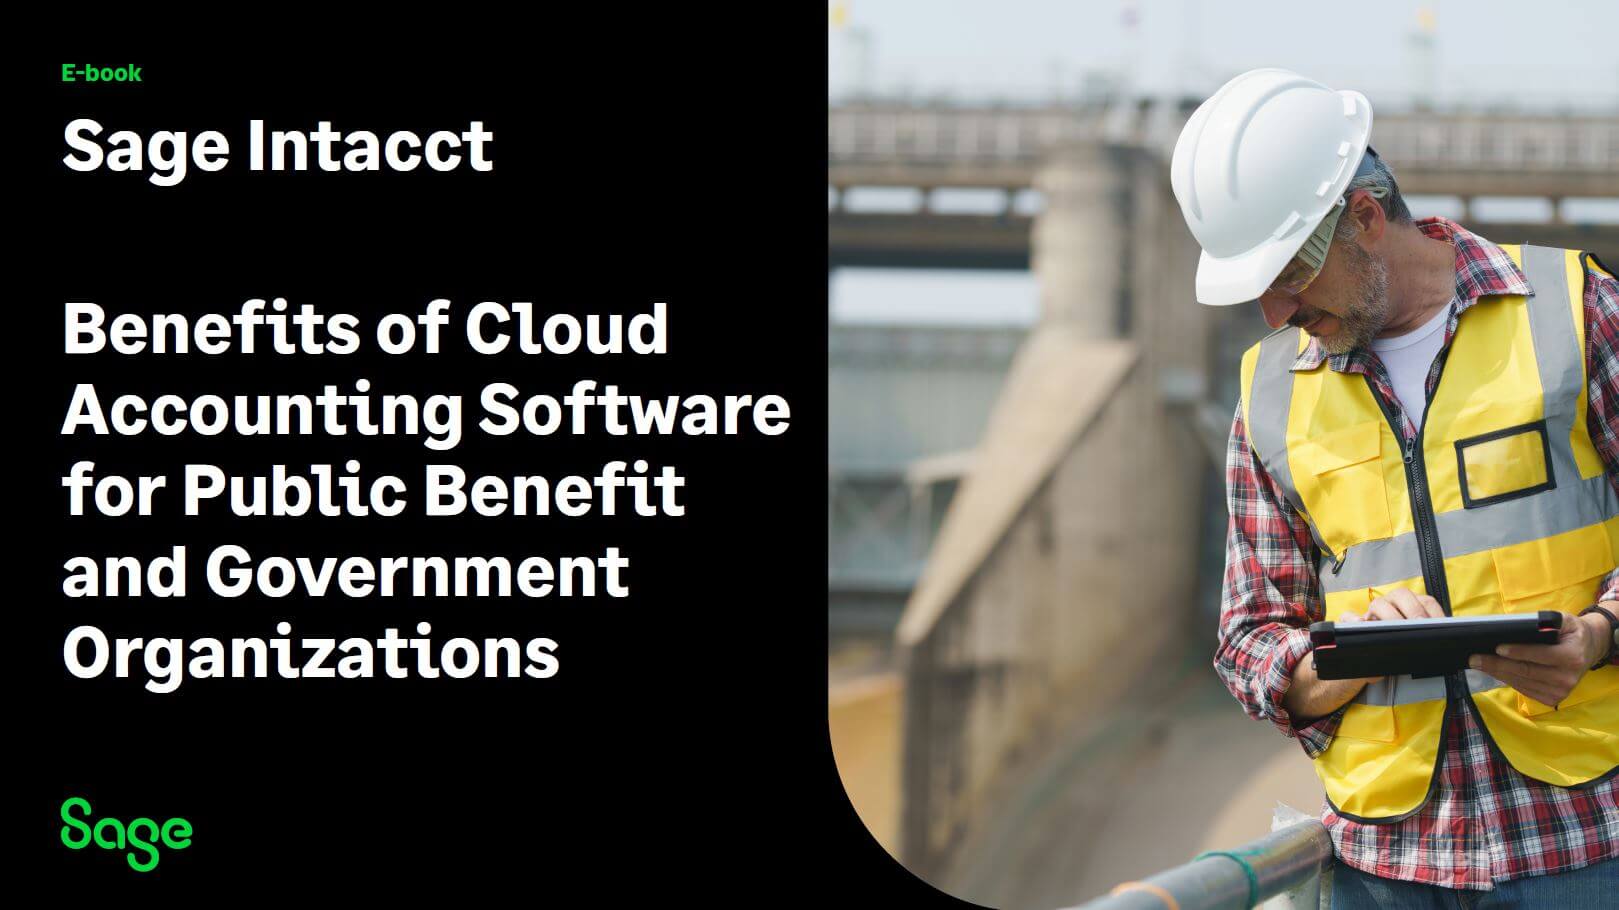 Sage Intacct E-Book: Benefits of Cloud Accounting Software for Public Benefit and Government Organizations